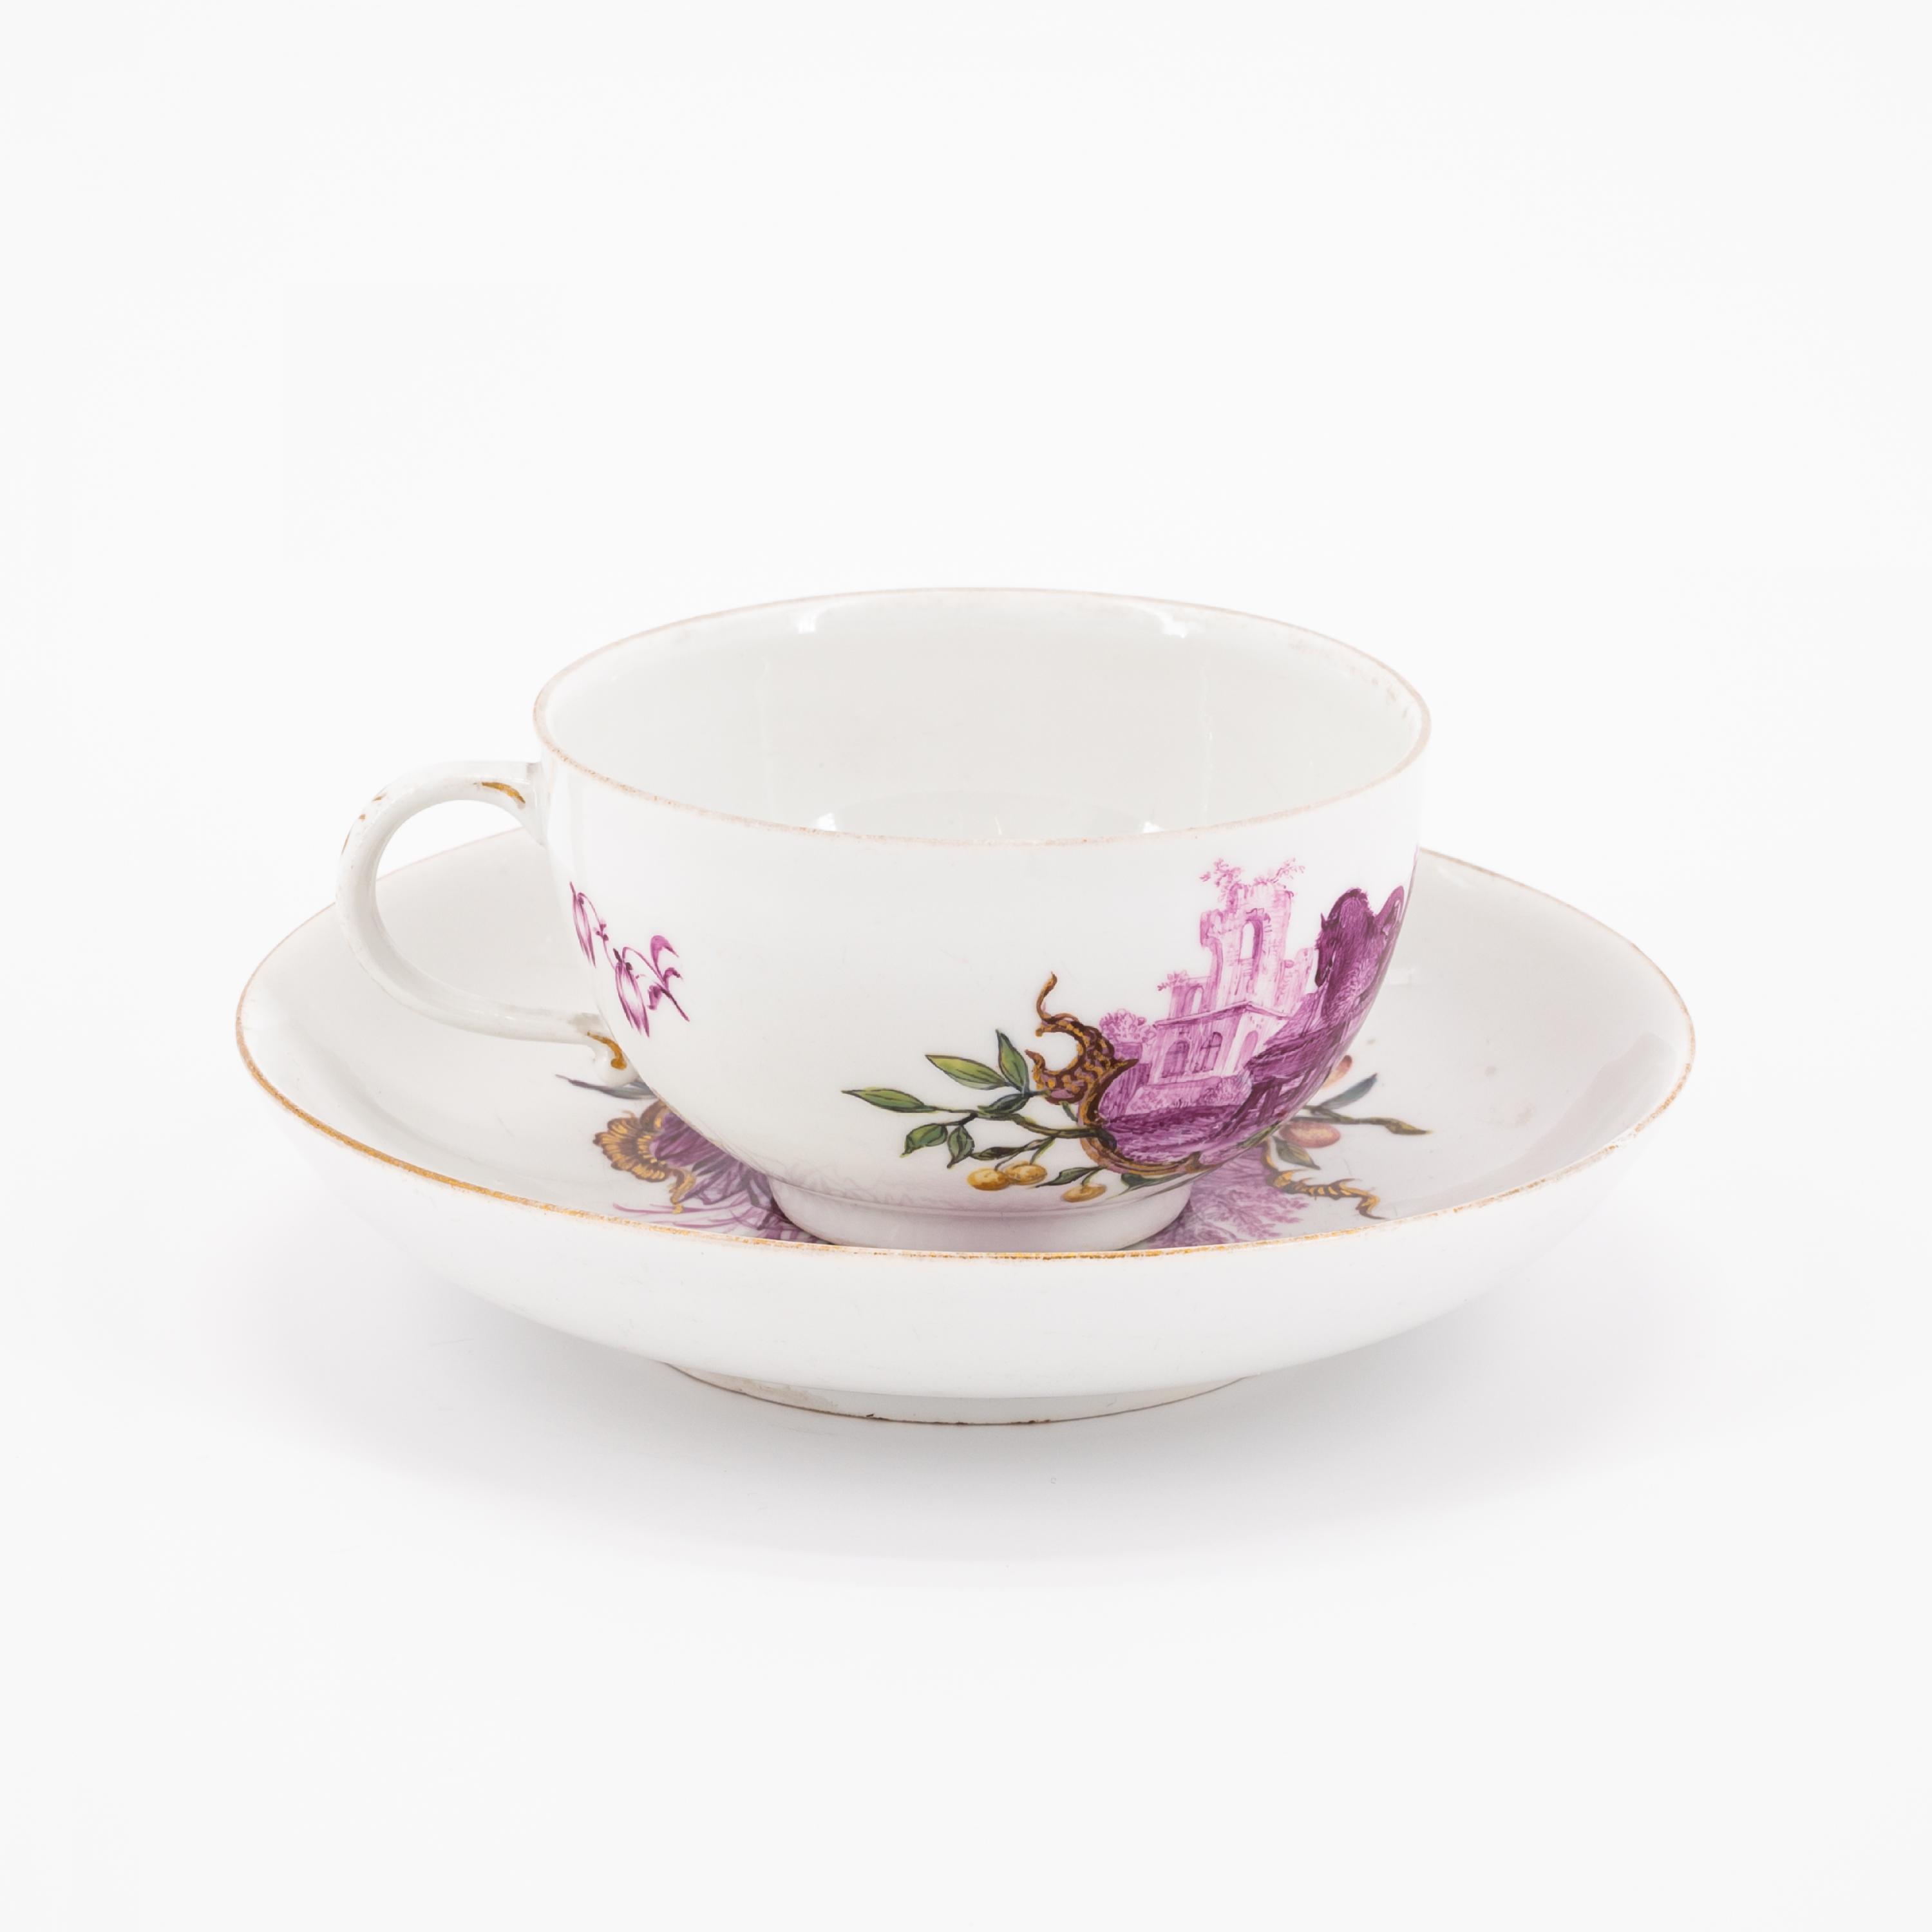 PORCELAIN CUP AND SAUCER WITH HUNTING SCENES IN PURPLE CAMAIEU - Image 3 of 6